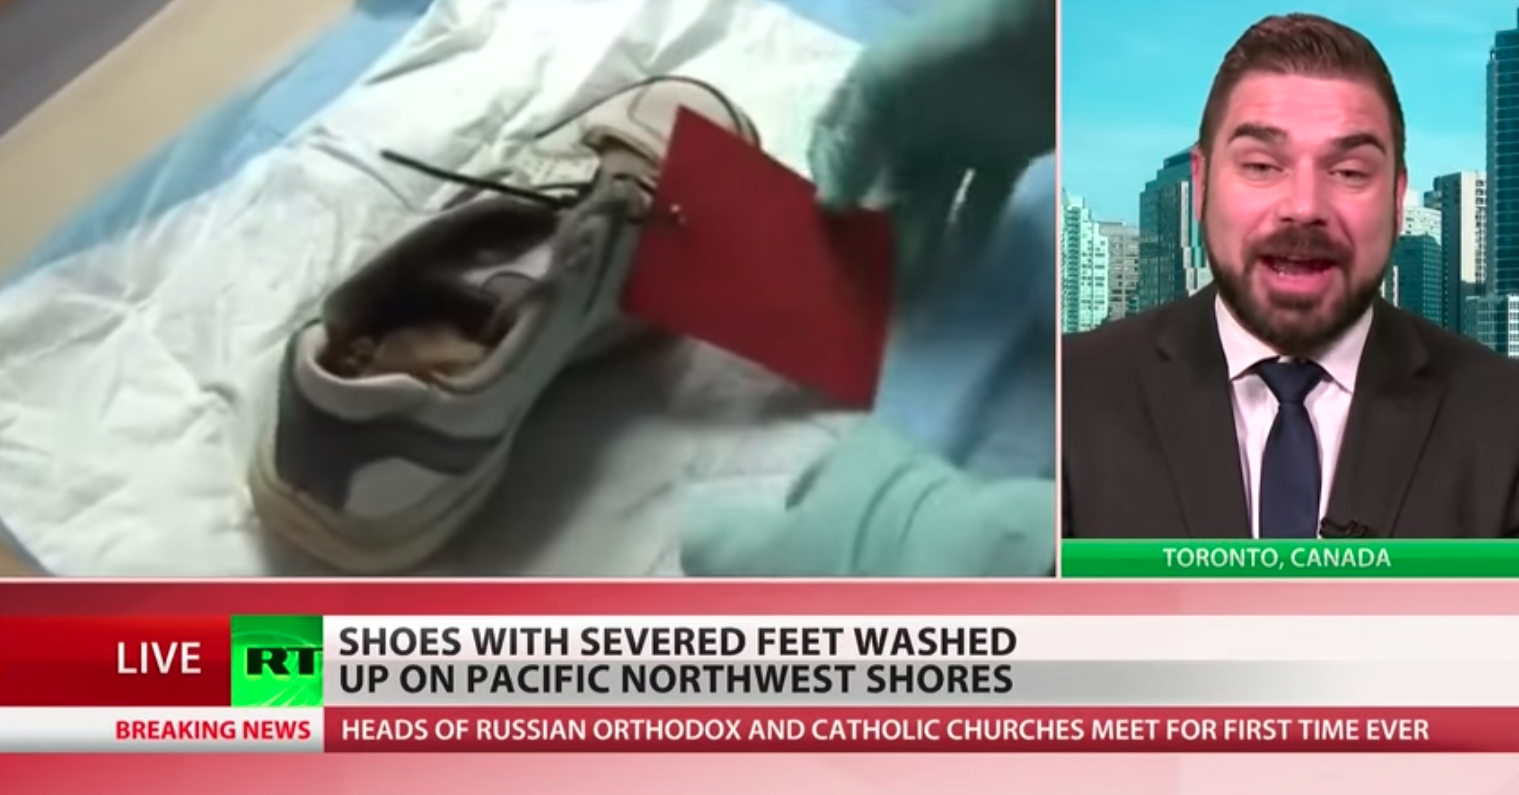 news segment of the story showing a shoe